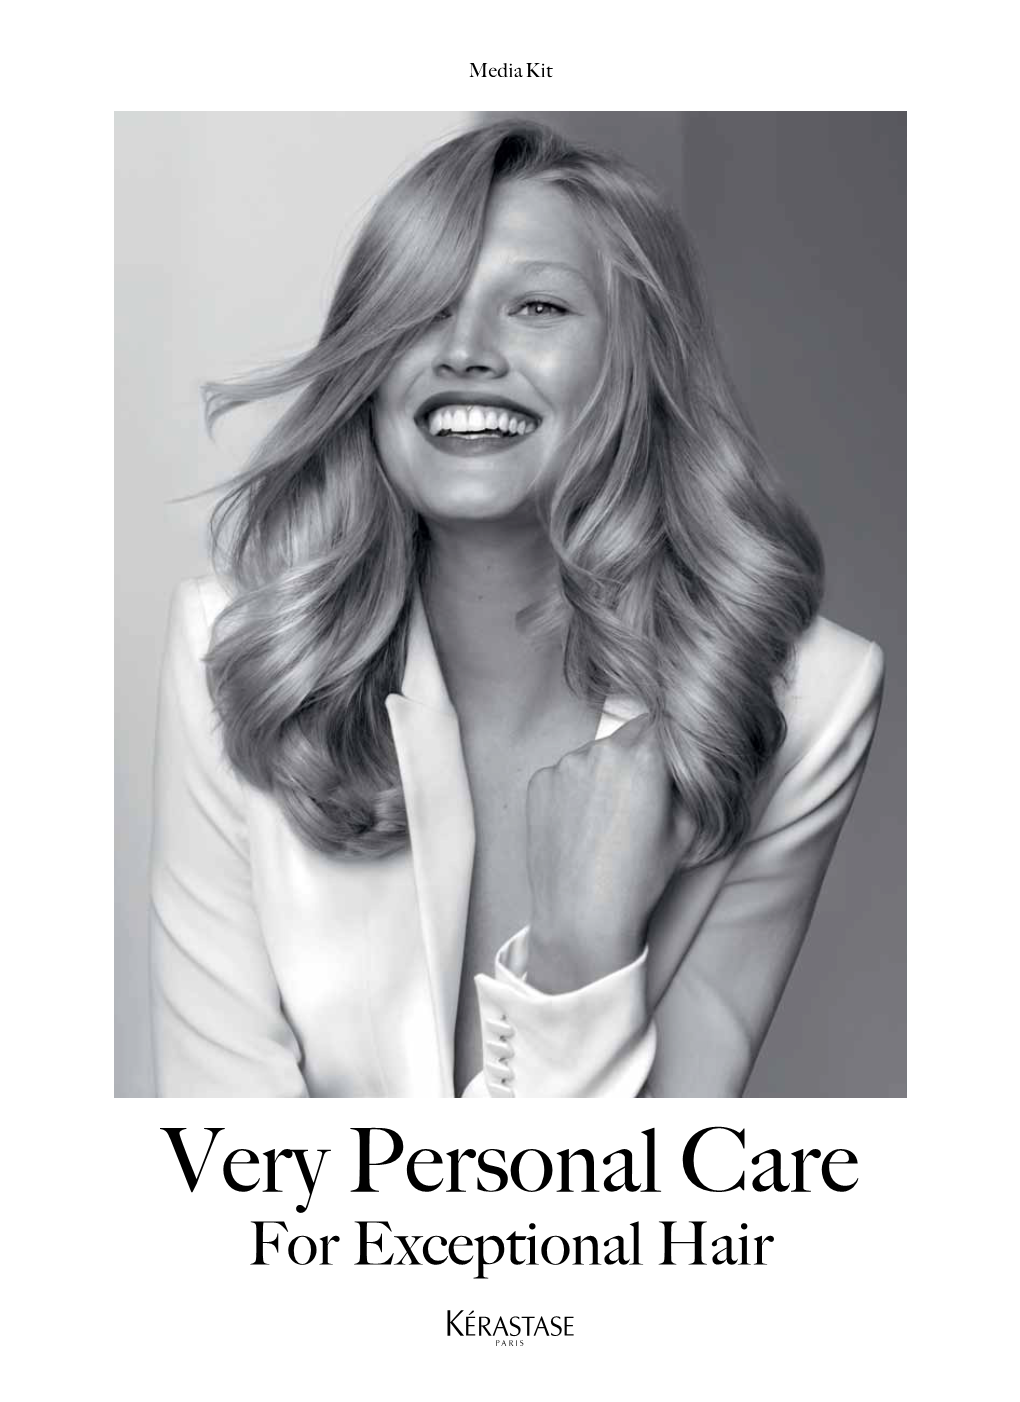 Very Personal Care for Exceptional Hair Summary